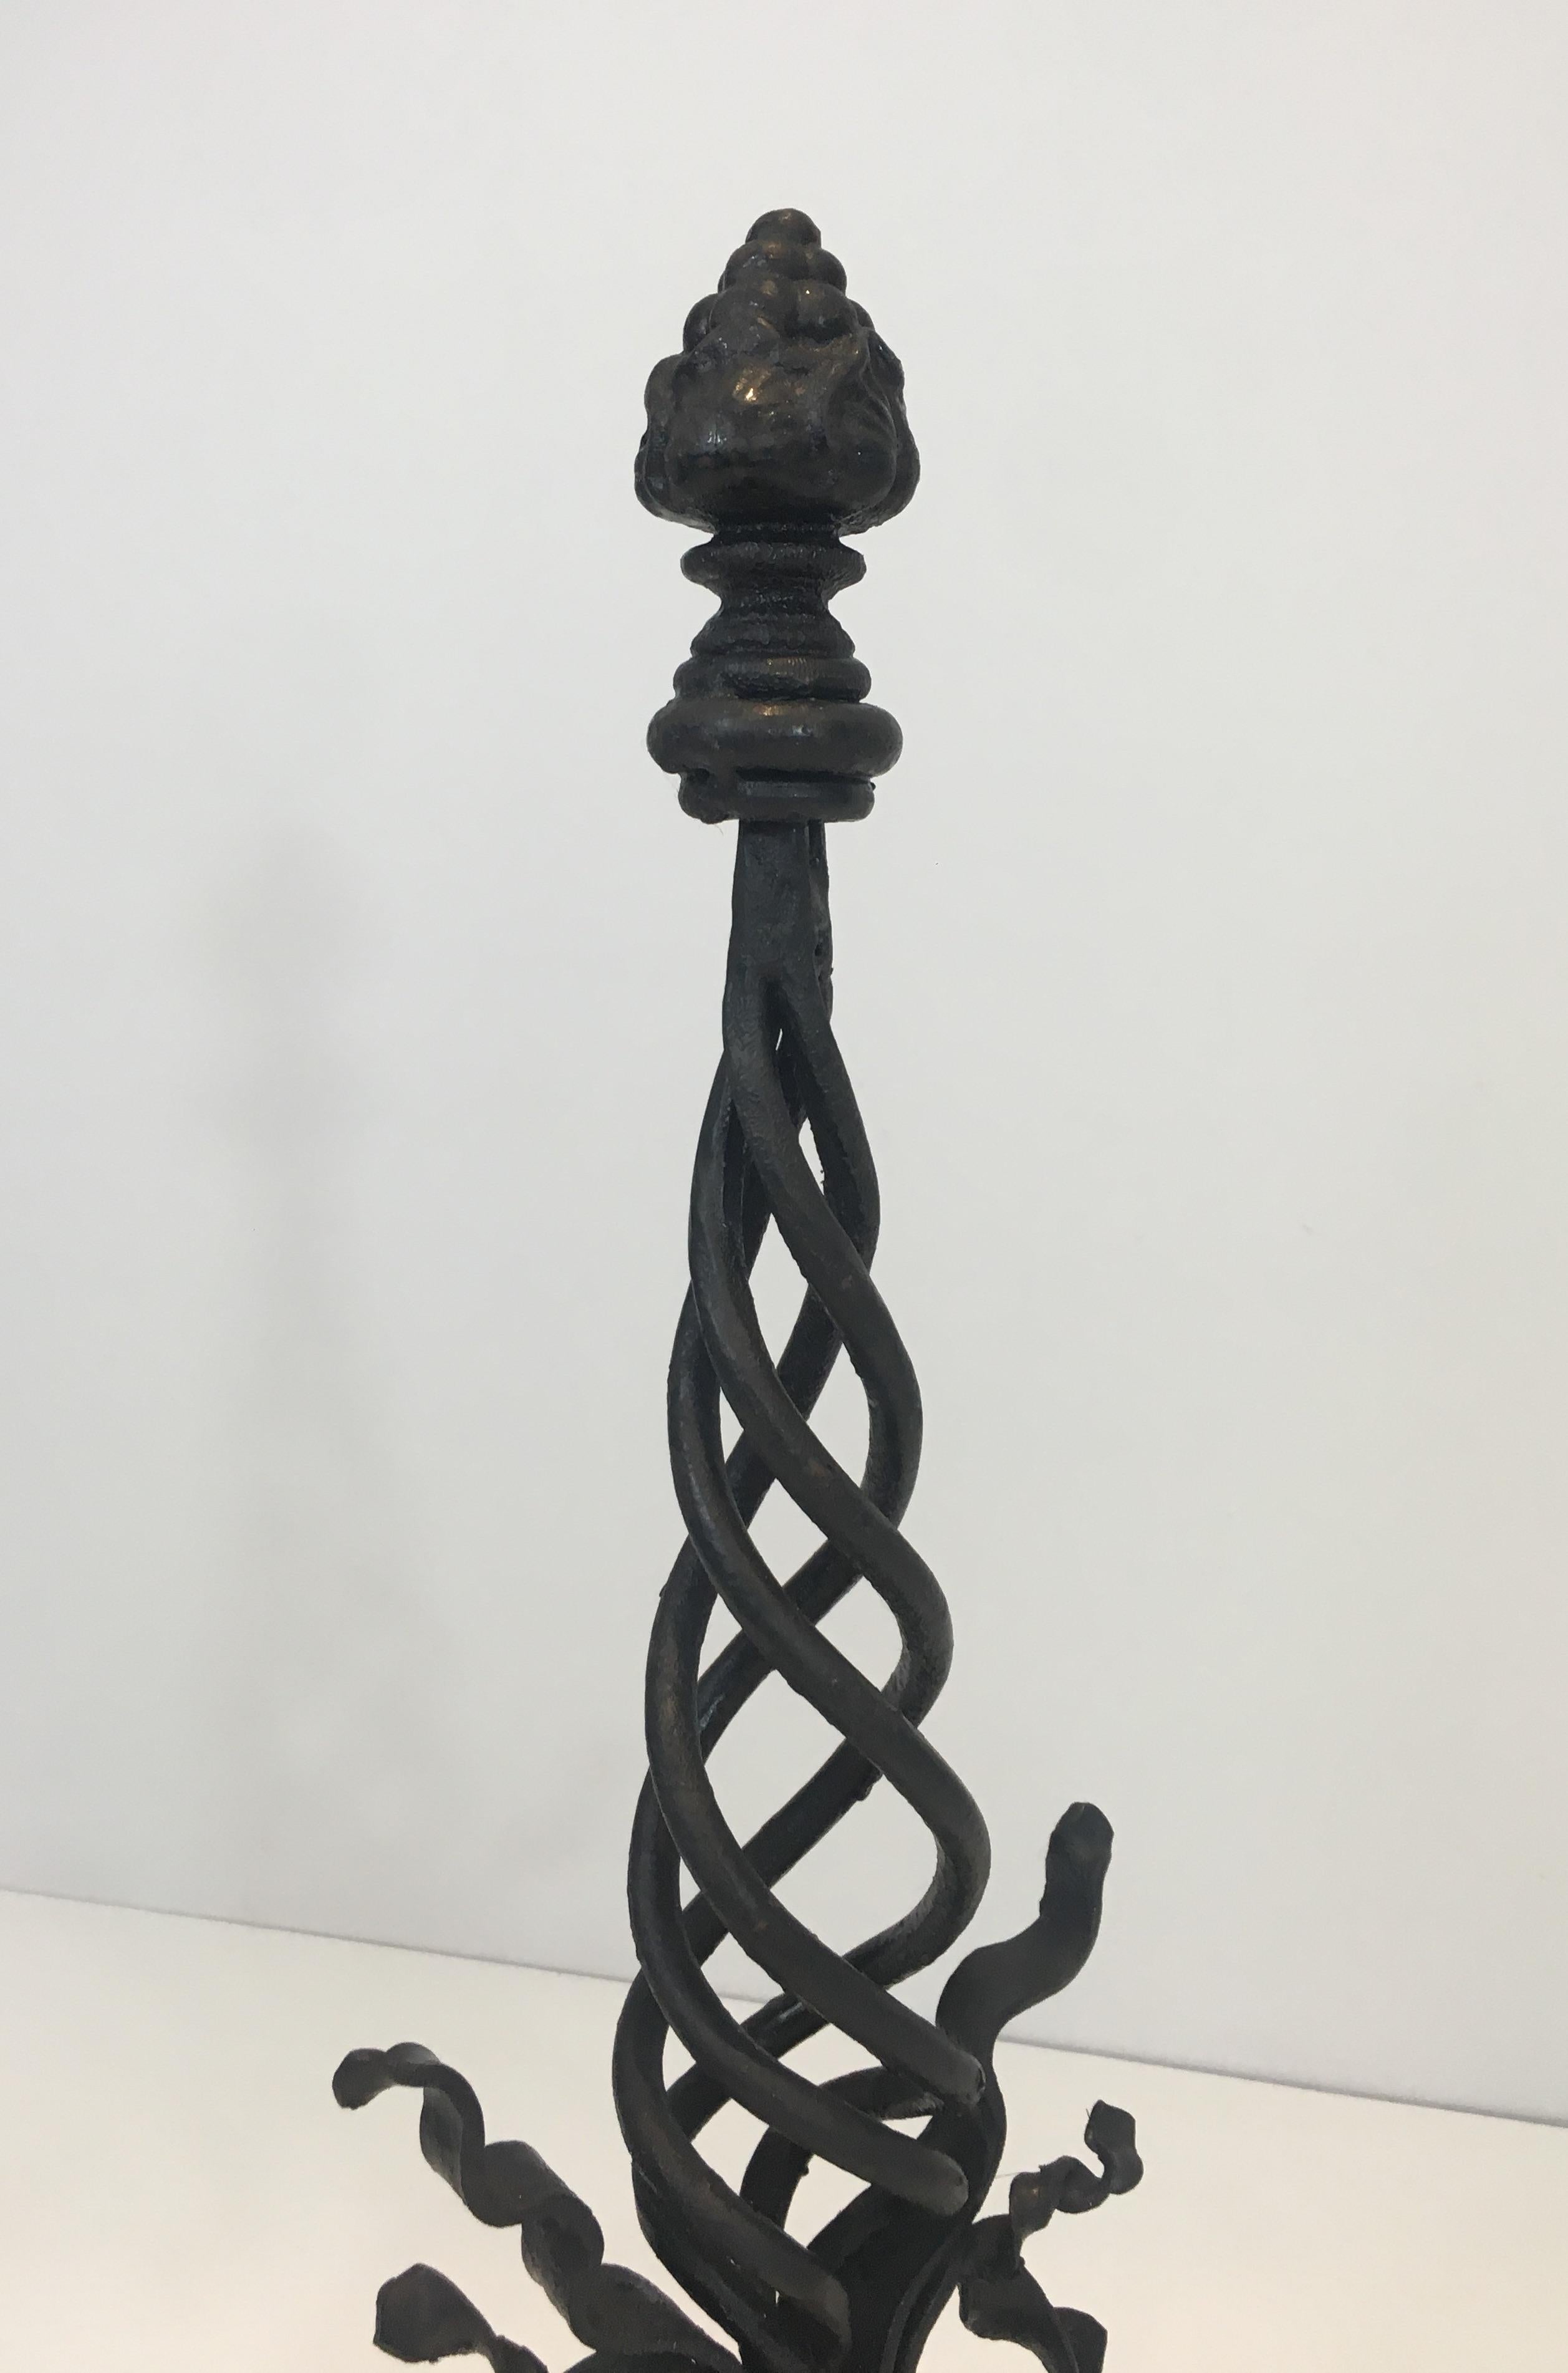 Pair of Twisted Wrought Iron Andirons with Finials, French, circa 1920 For Sale 8